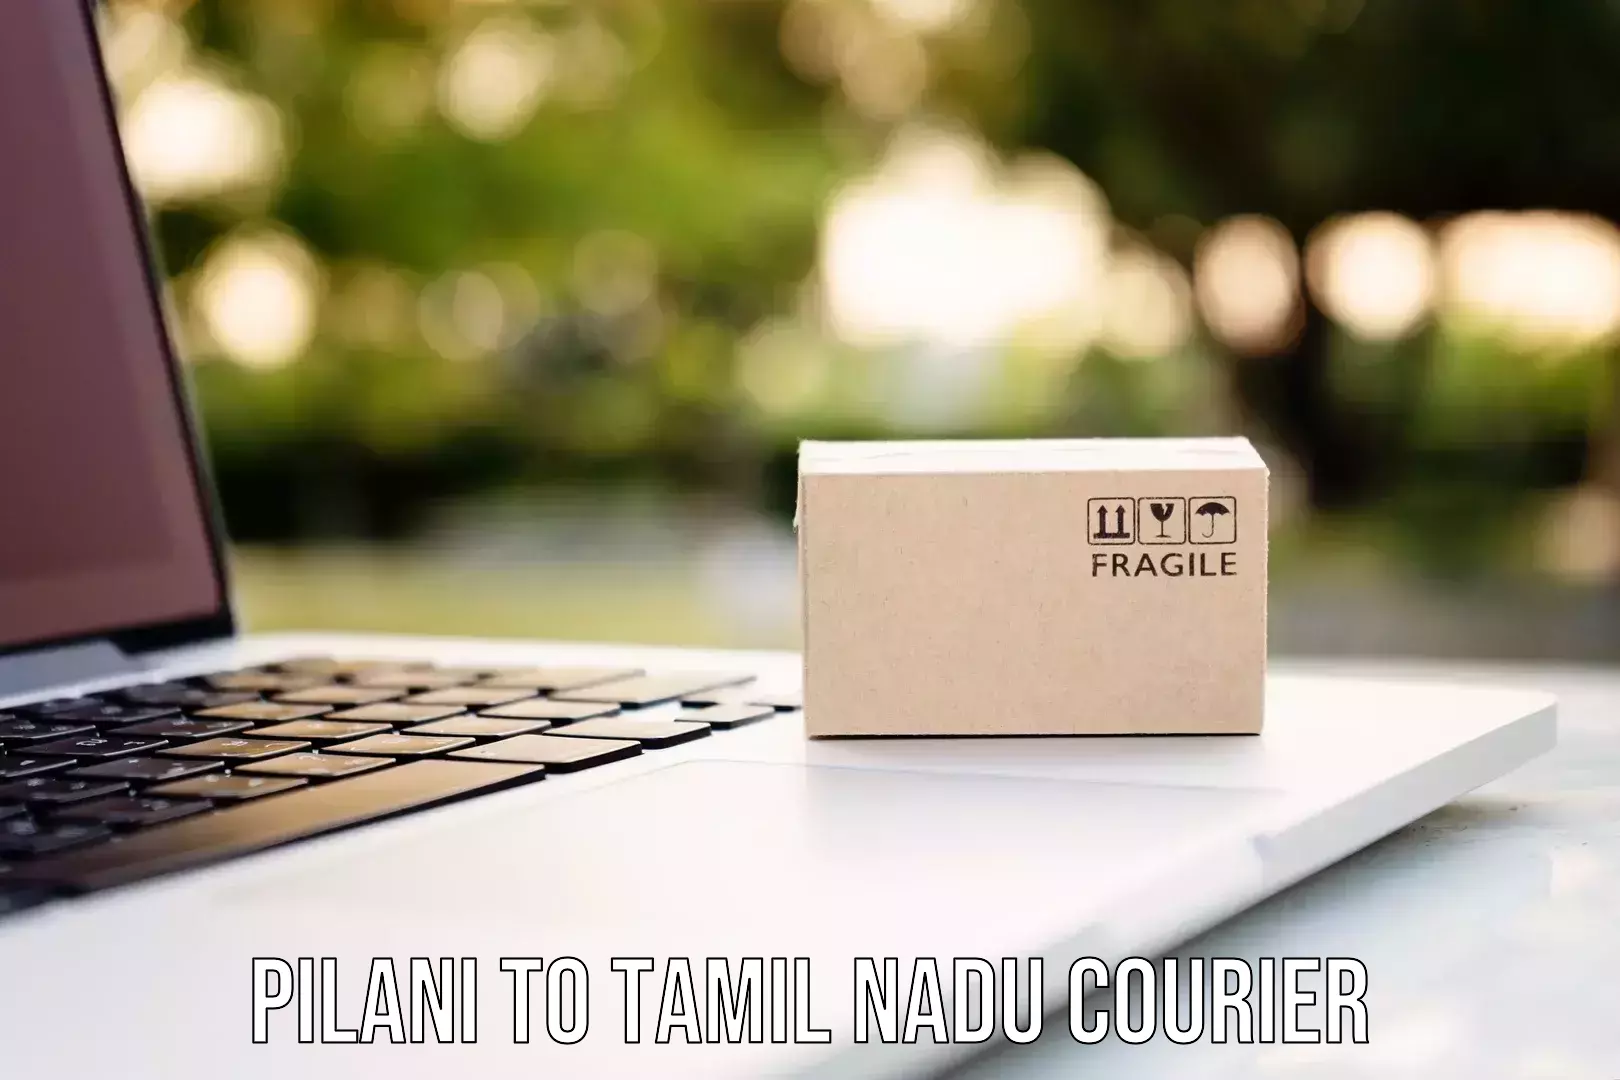 State-of-the-art courier technology Pilani to Tiruchi